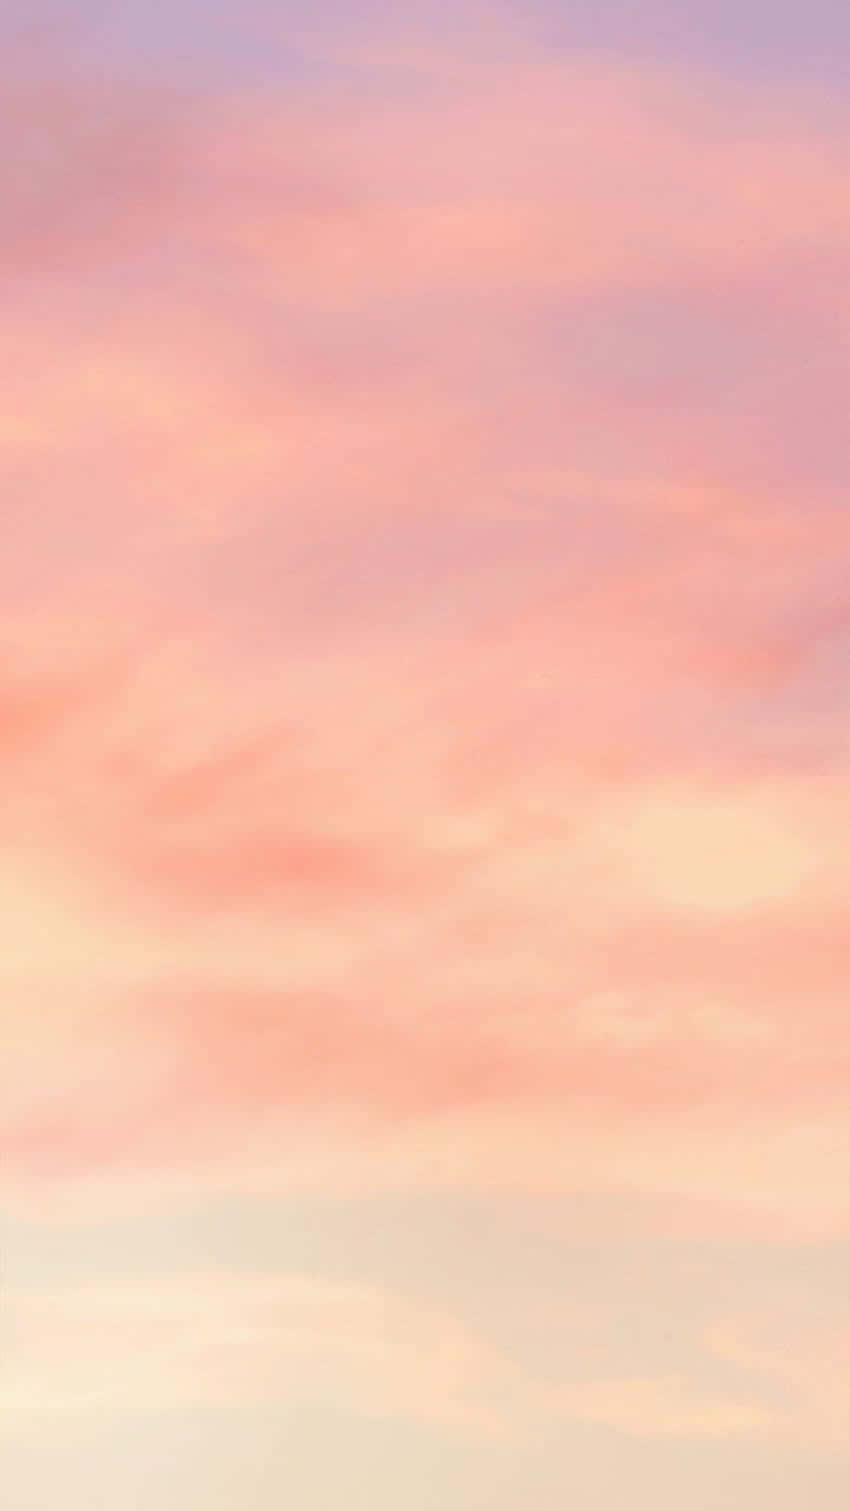 Lavender skies and wispy pink clouds - Color Pastel Aesthetic Wallpaper